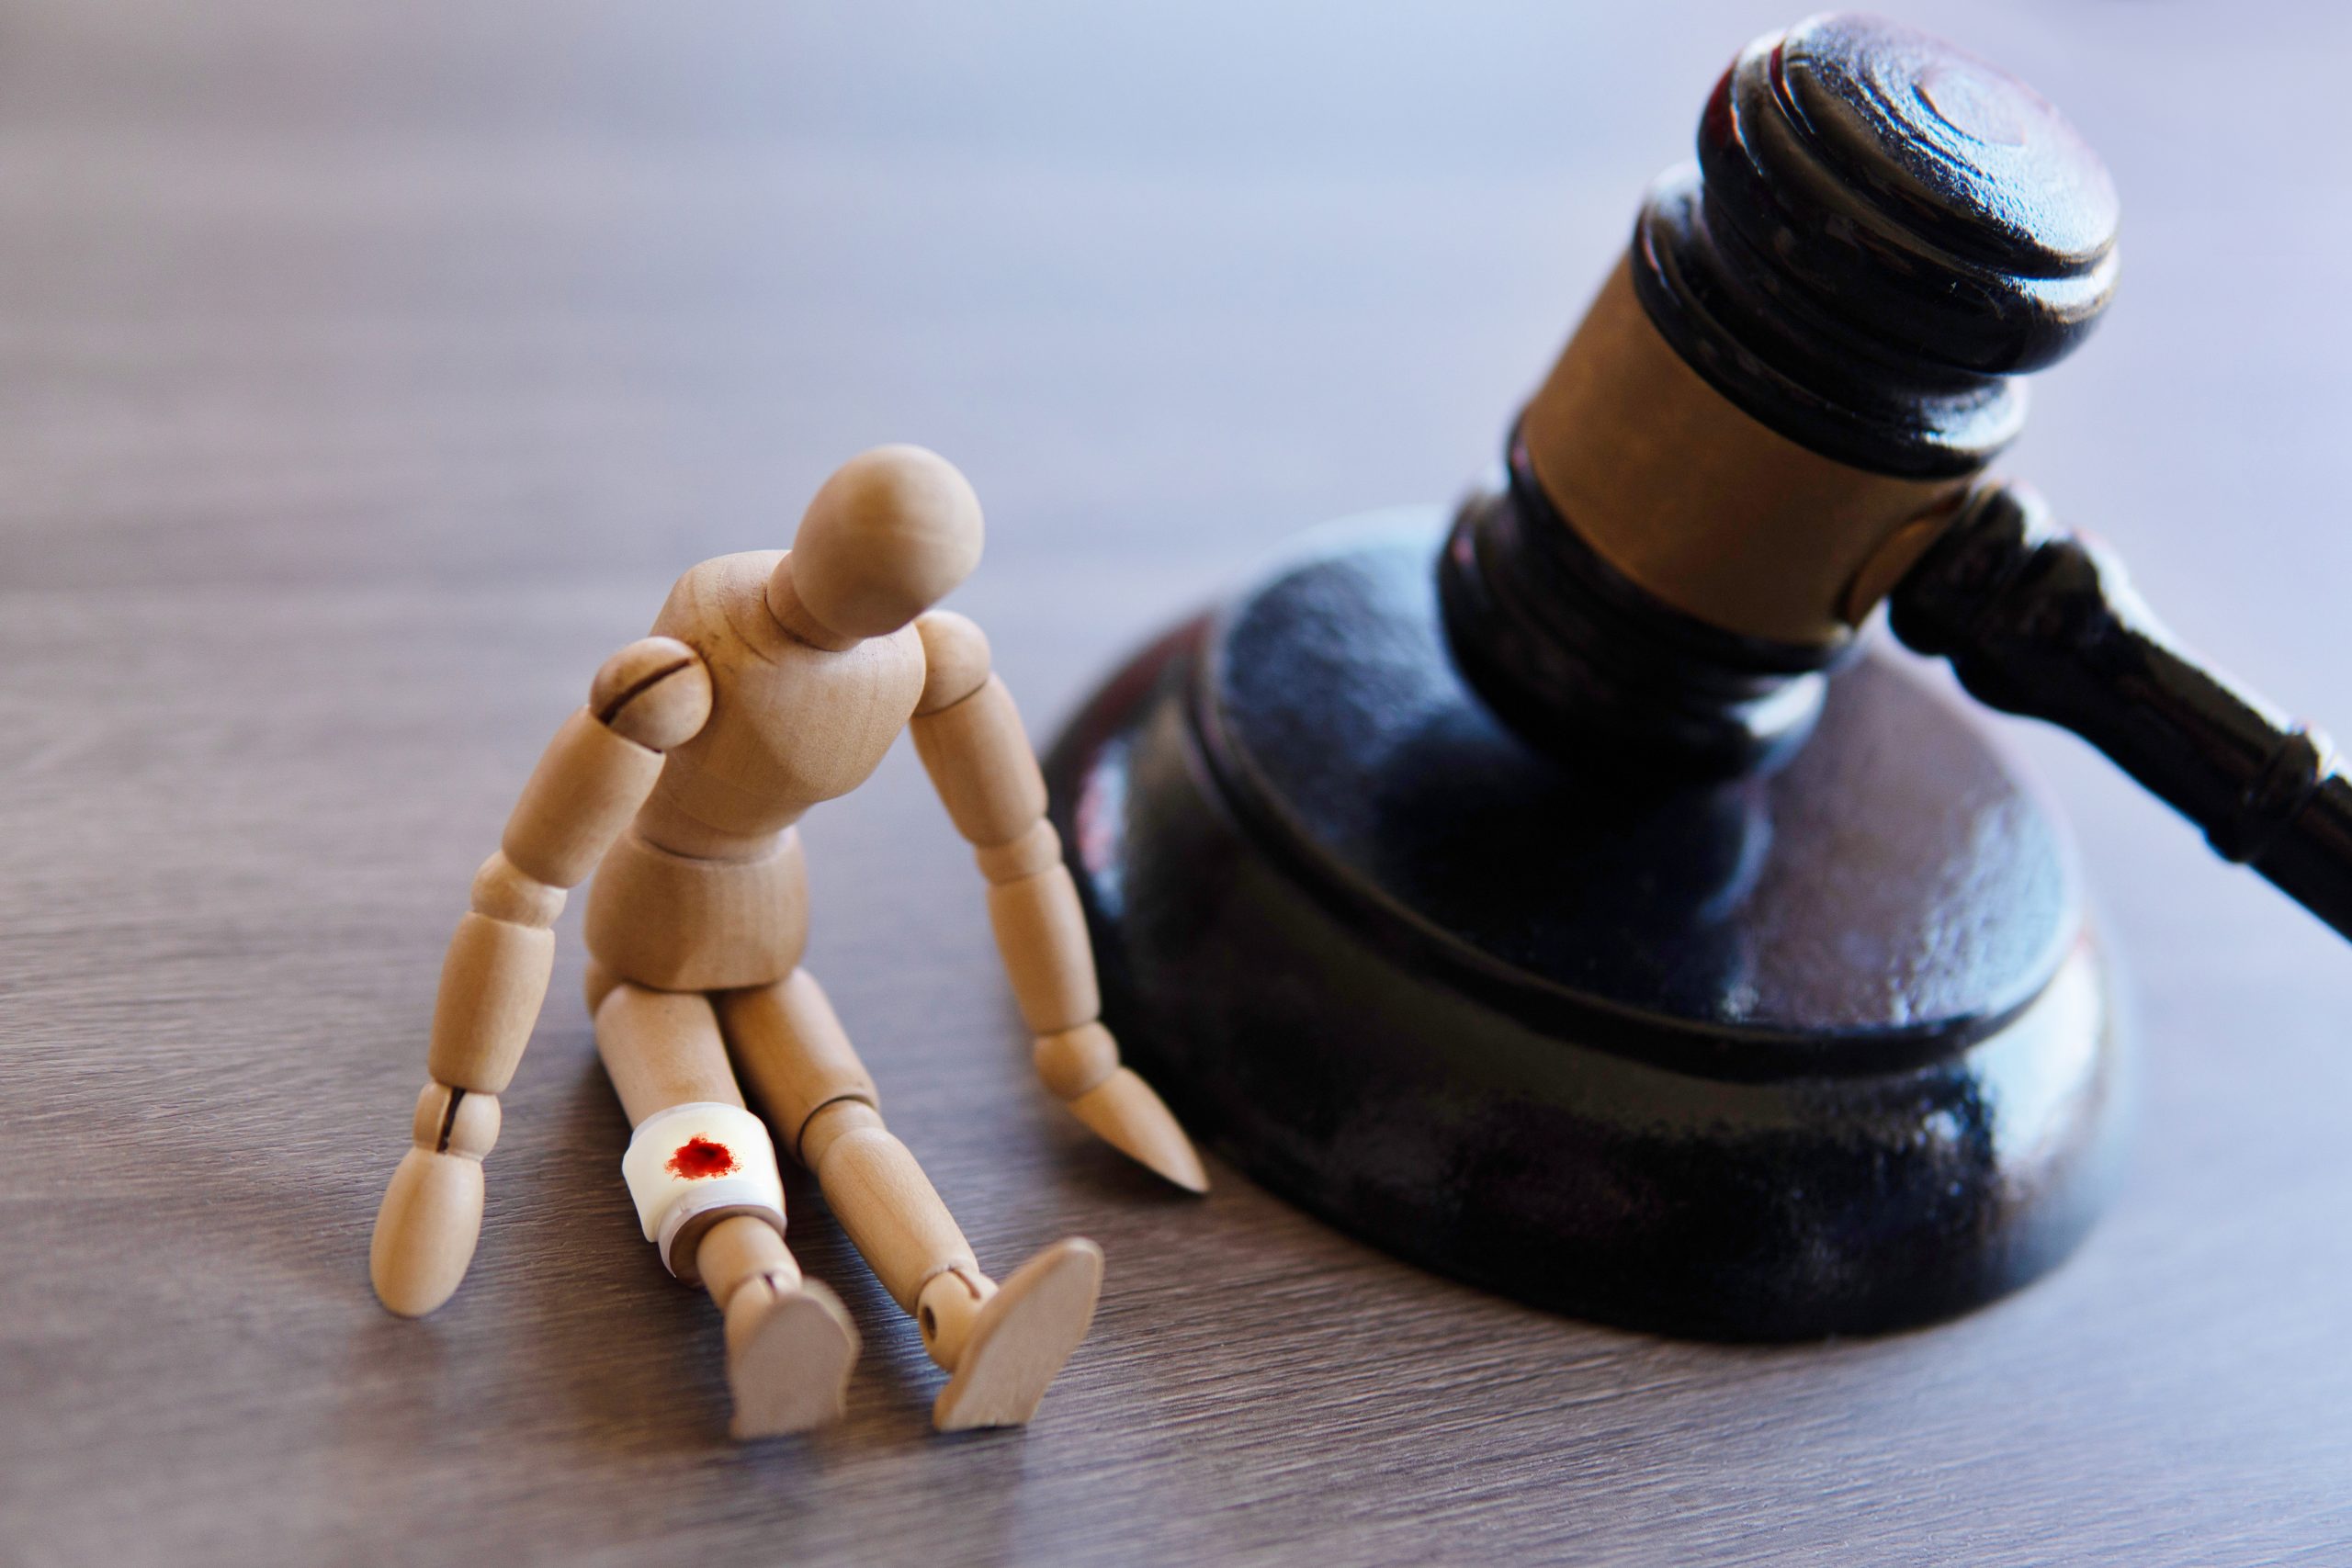 A wooden artist mannequin with a bandage on its knee, displaying a red mark, sits leaning against a large gavel on a wooden surface, symbolizing injury and legal justice, representing the varied types of personal injury cases.